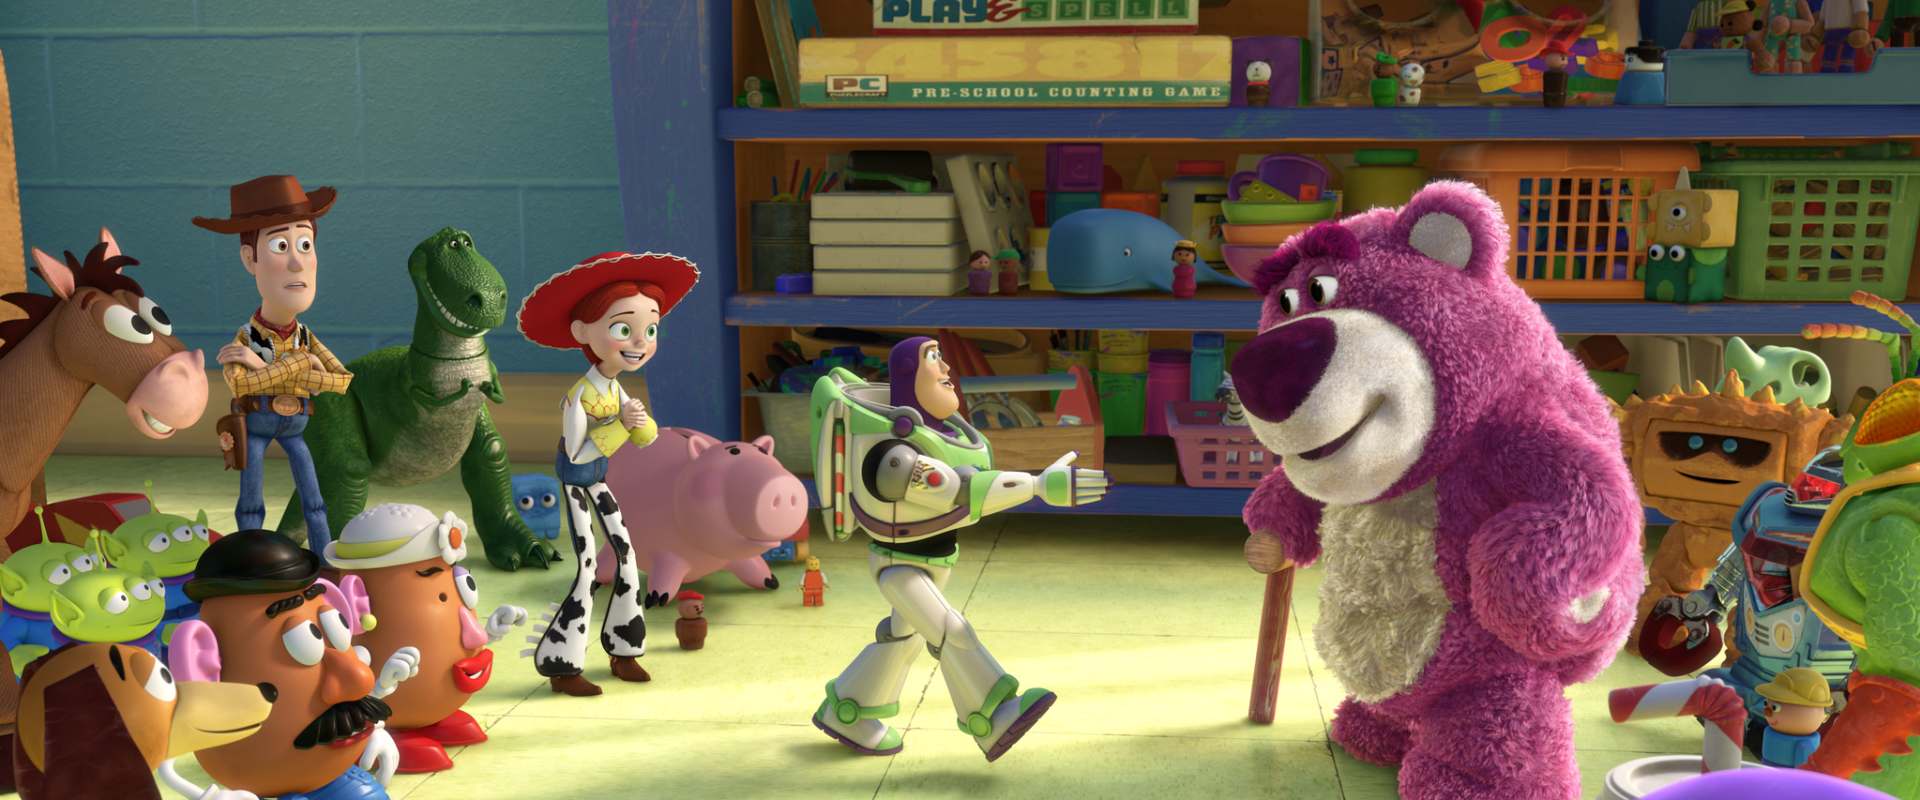 Toy Story 3 background 1